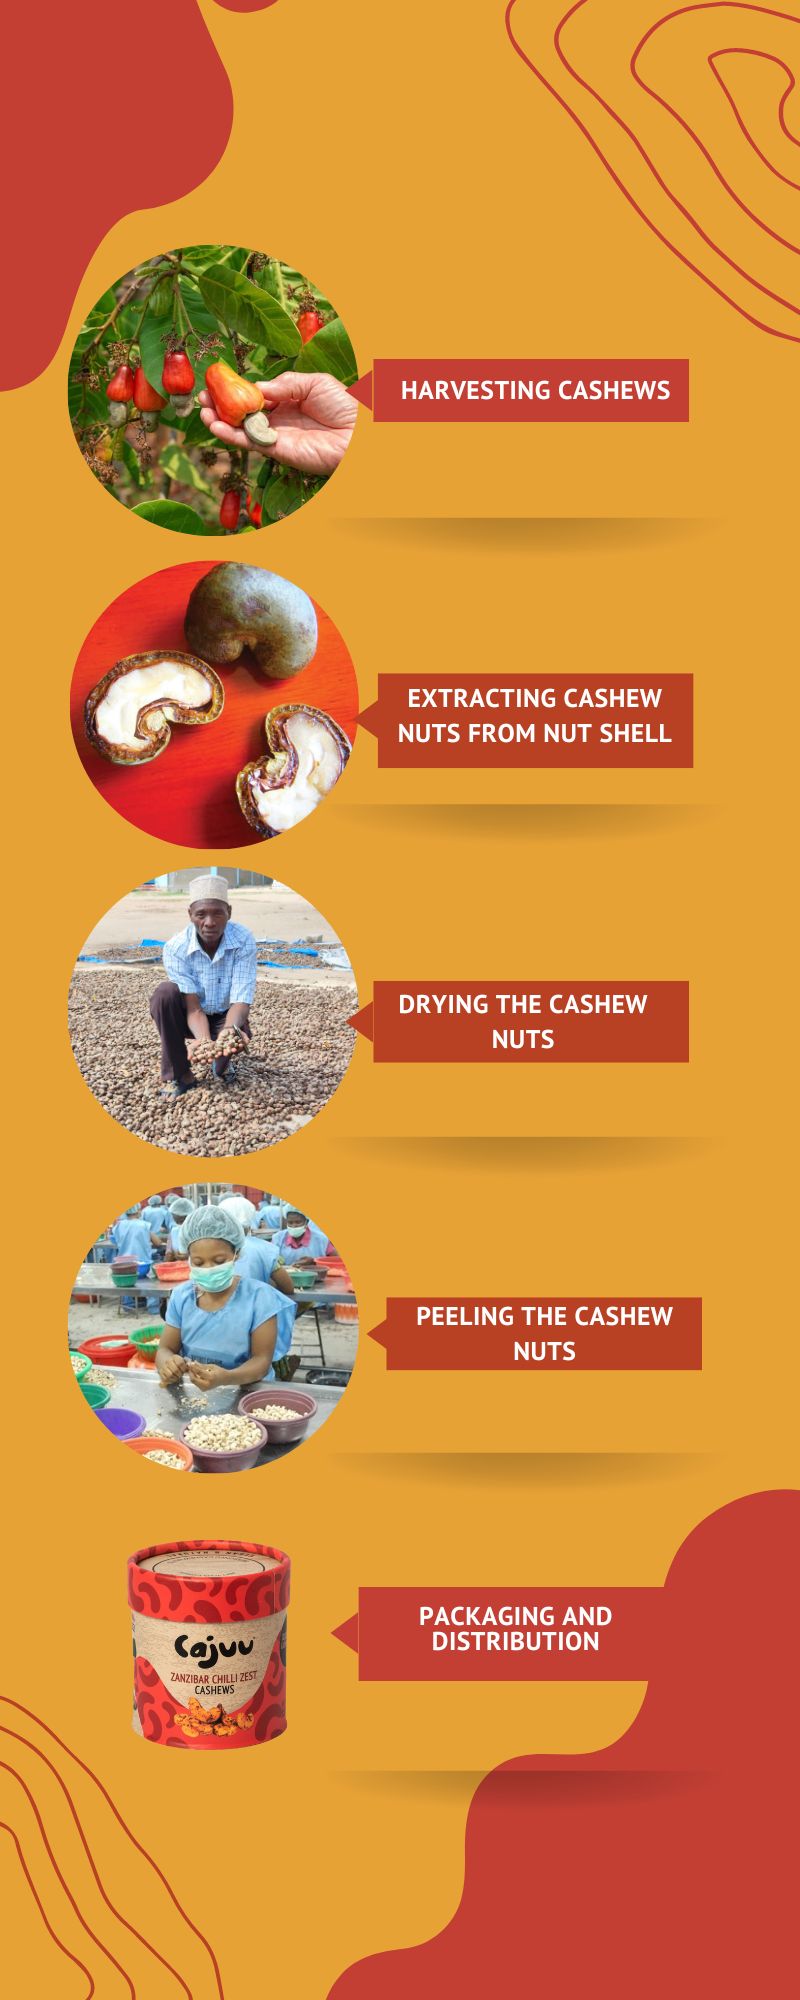 How are Cashews Harvested and Processed: From Tree to Table